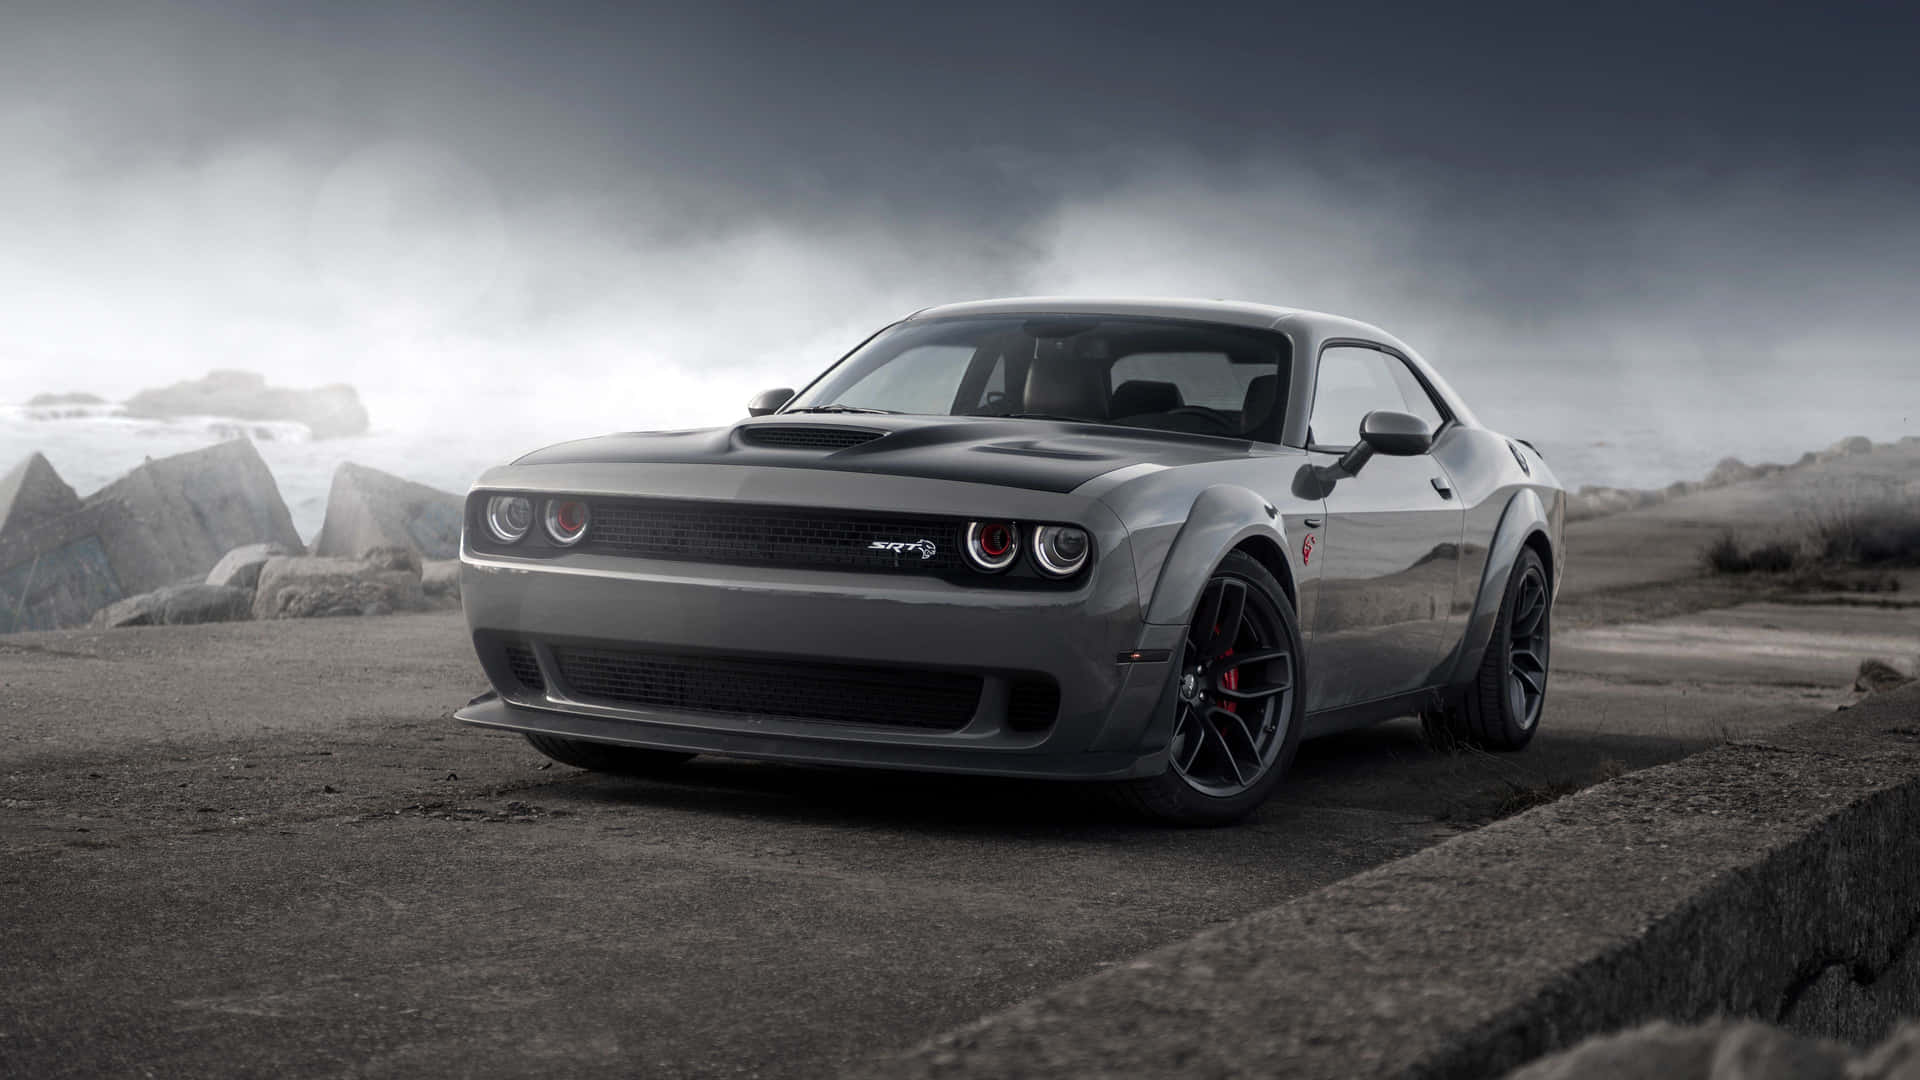 “The Unstoppable Power of the Hellcat” Wallpaper